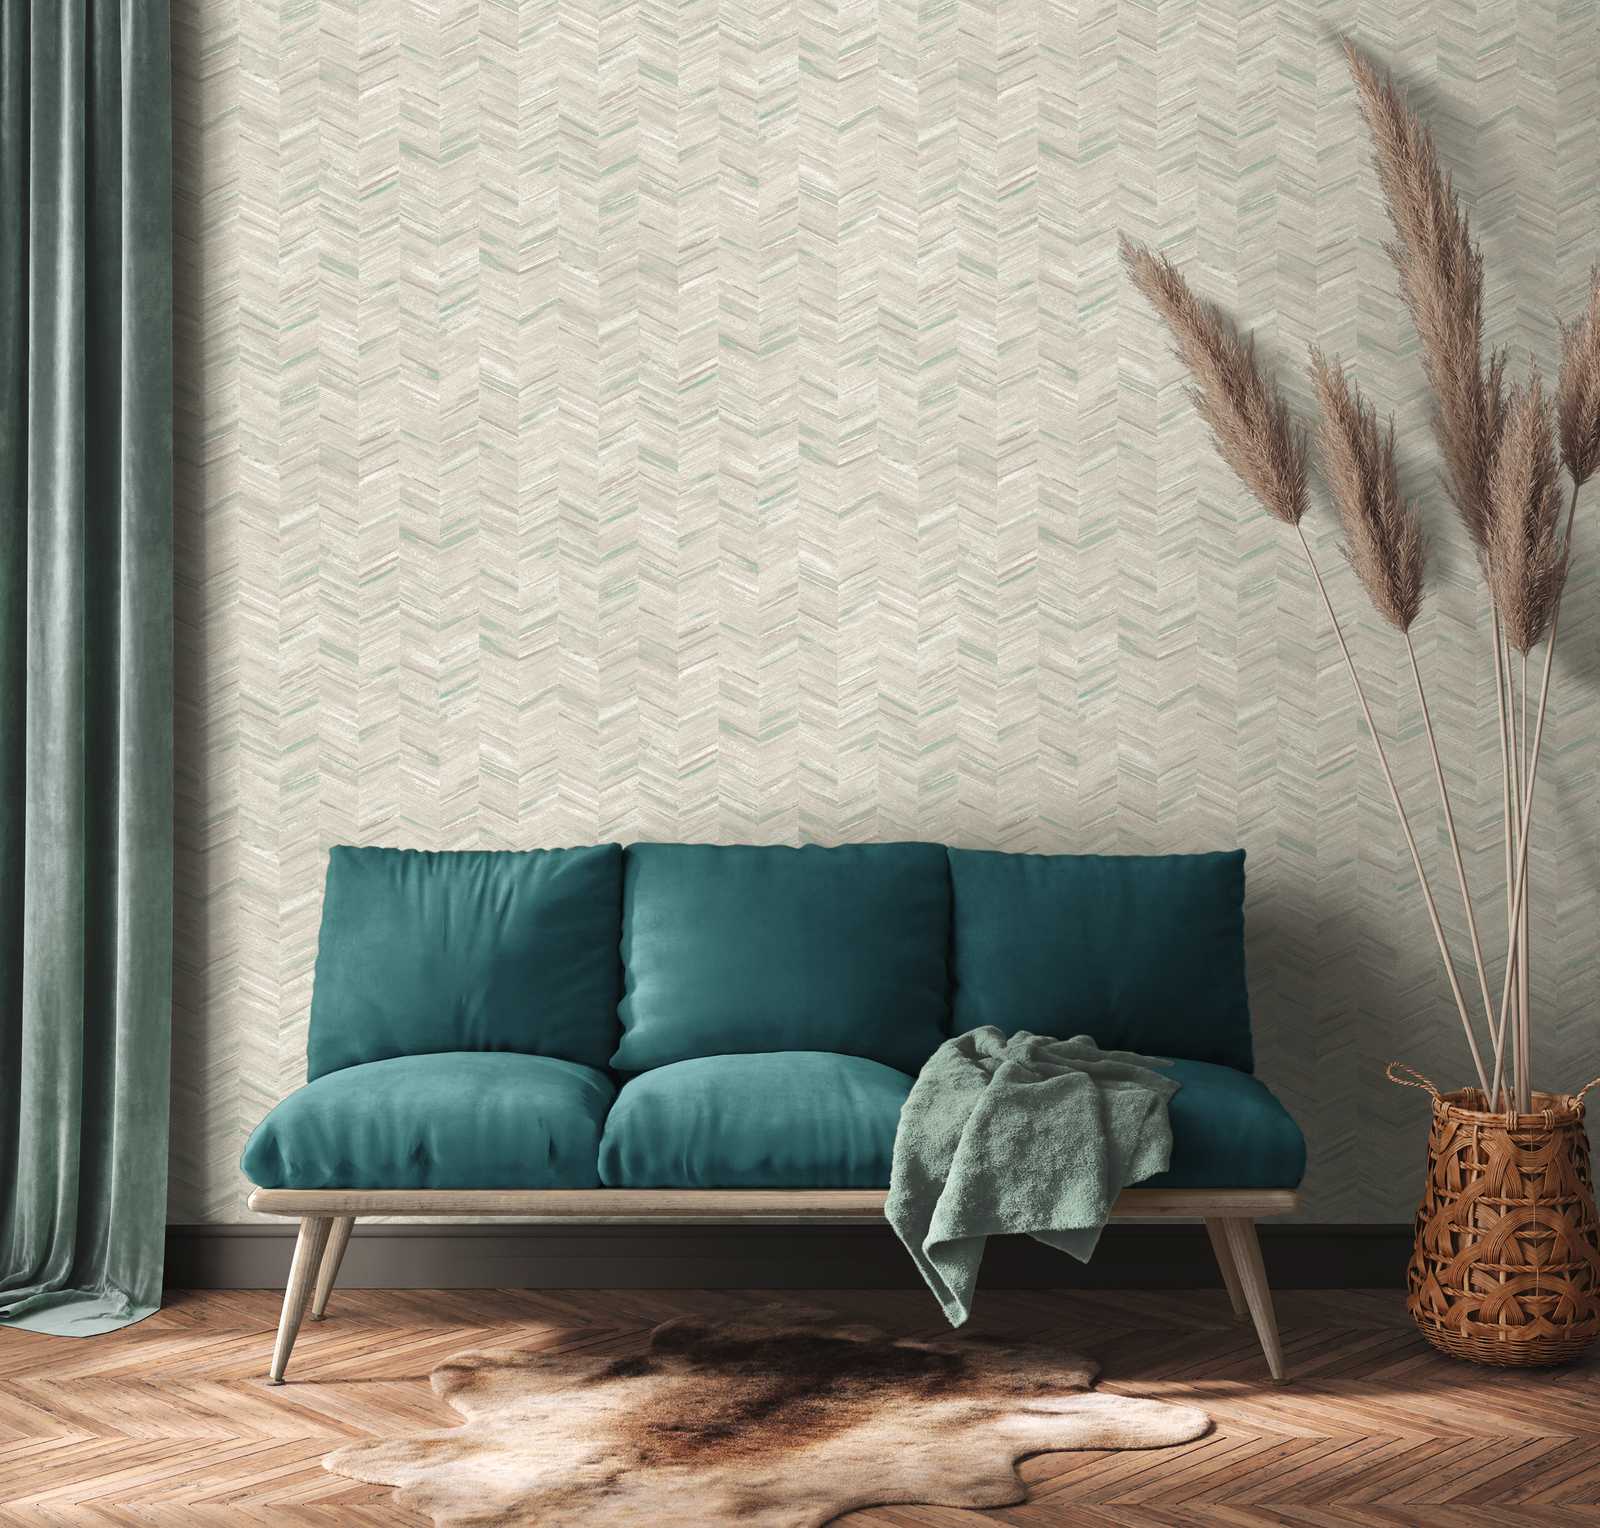             Textured wallpaper non-woven with wood effect & herringbone pattern - grey, white
        